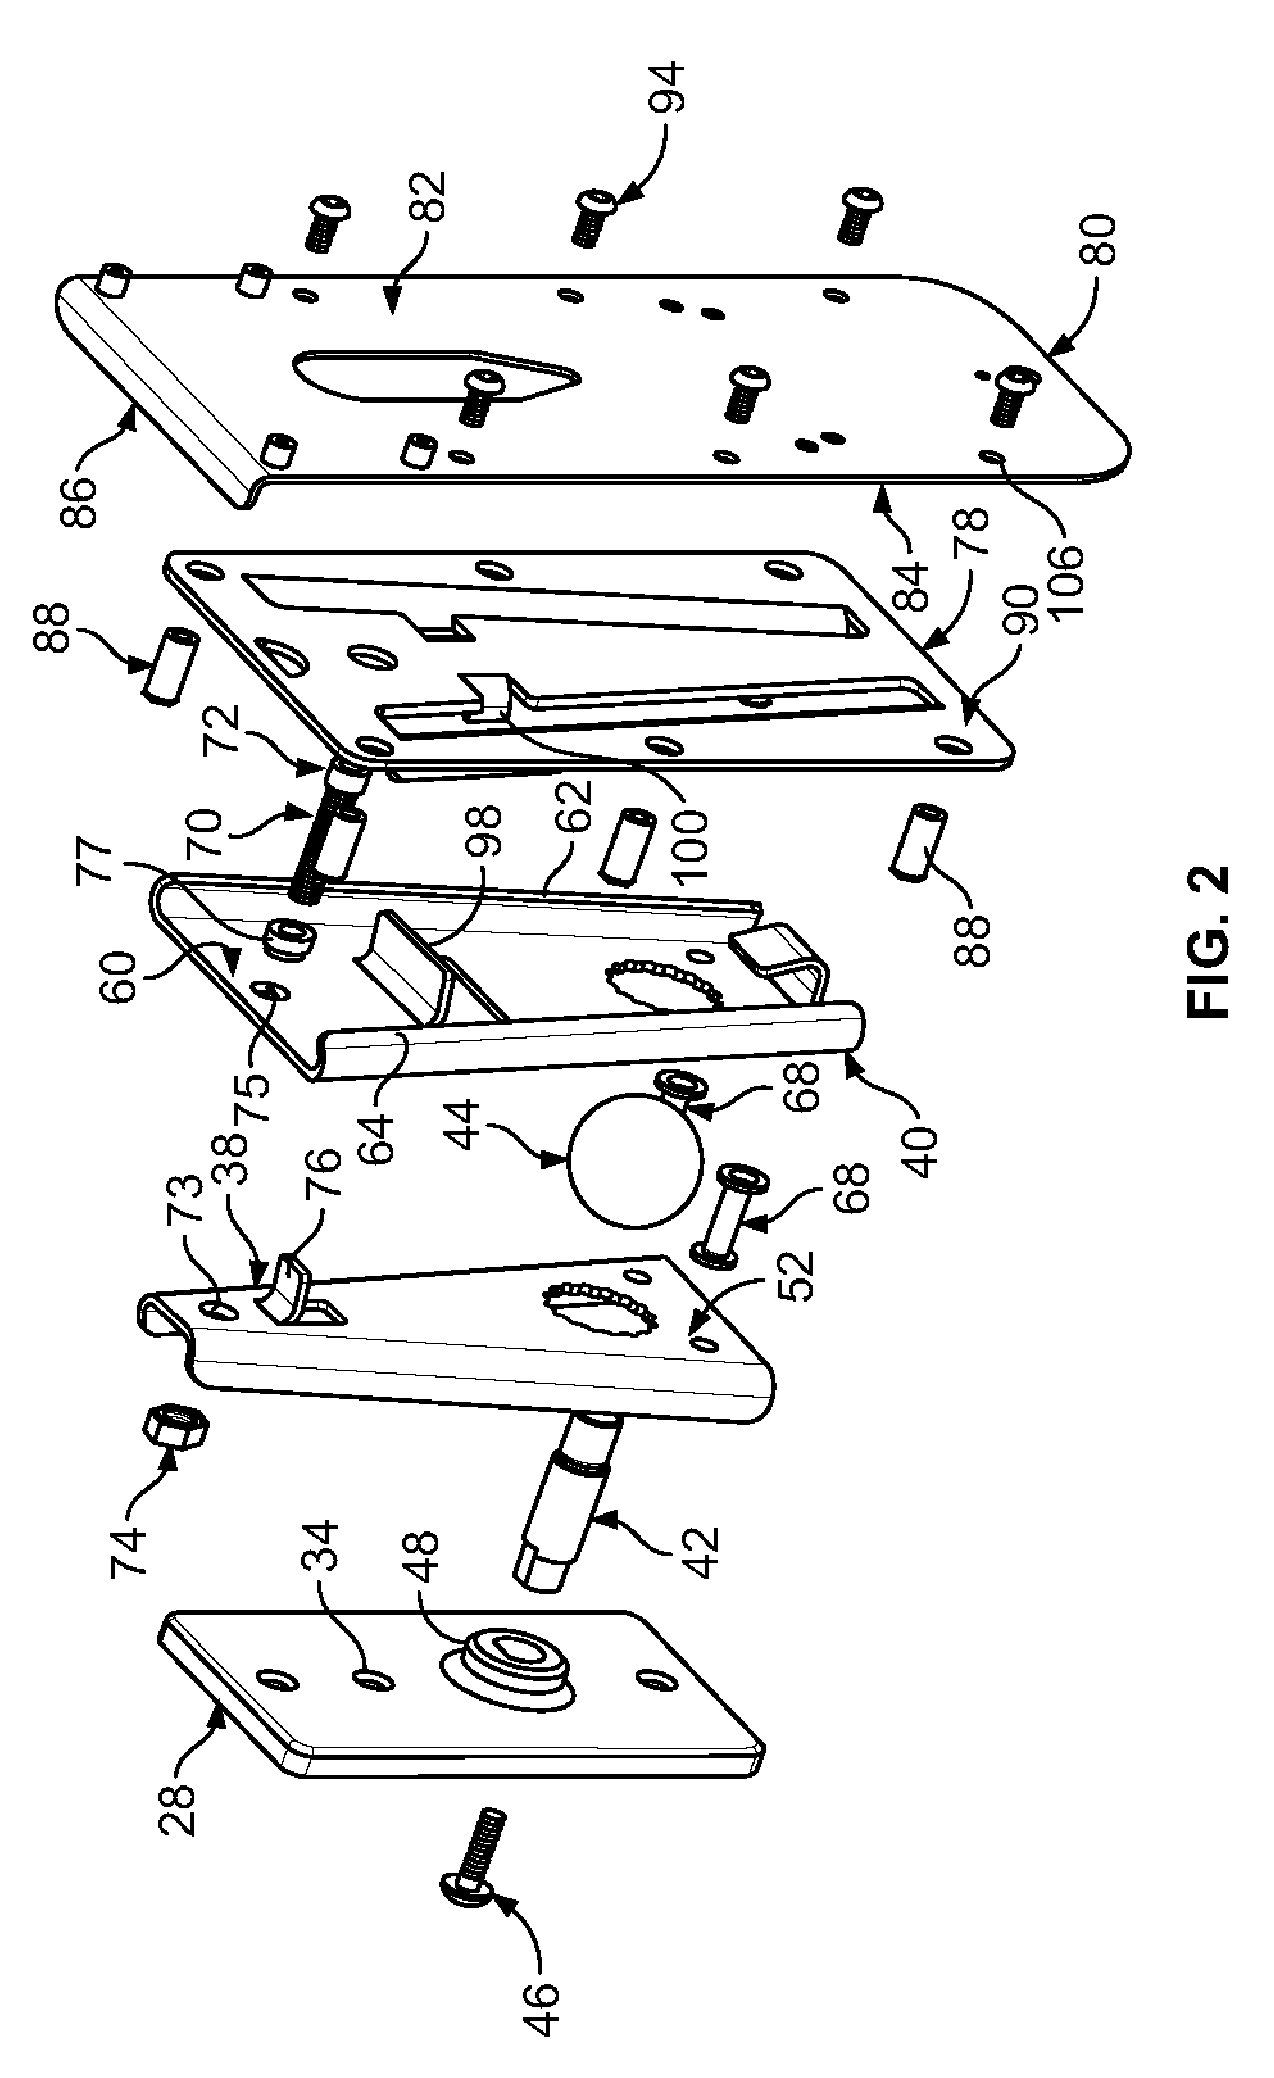 Method and apparatus for adjustably mounting a speaker